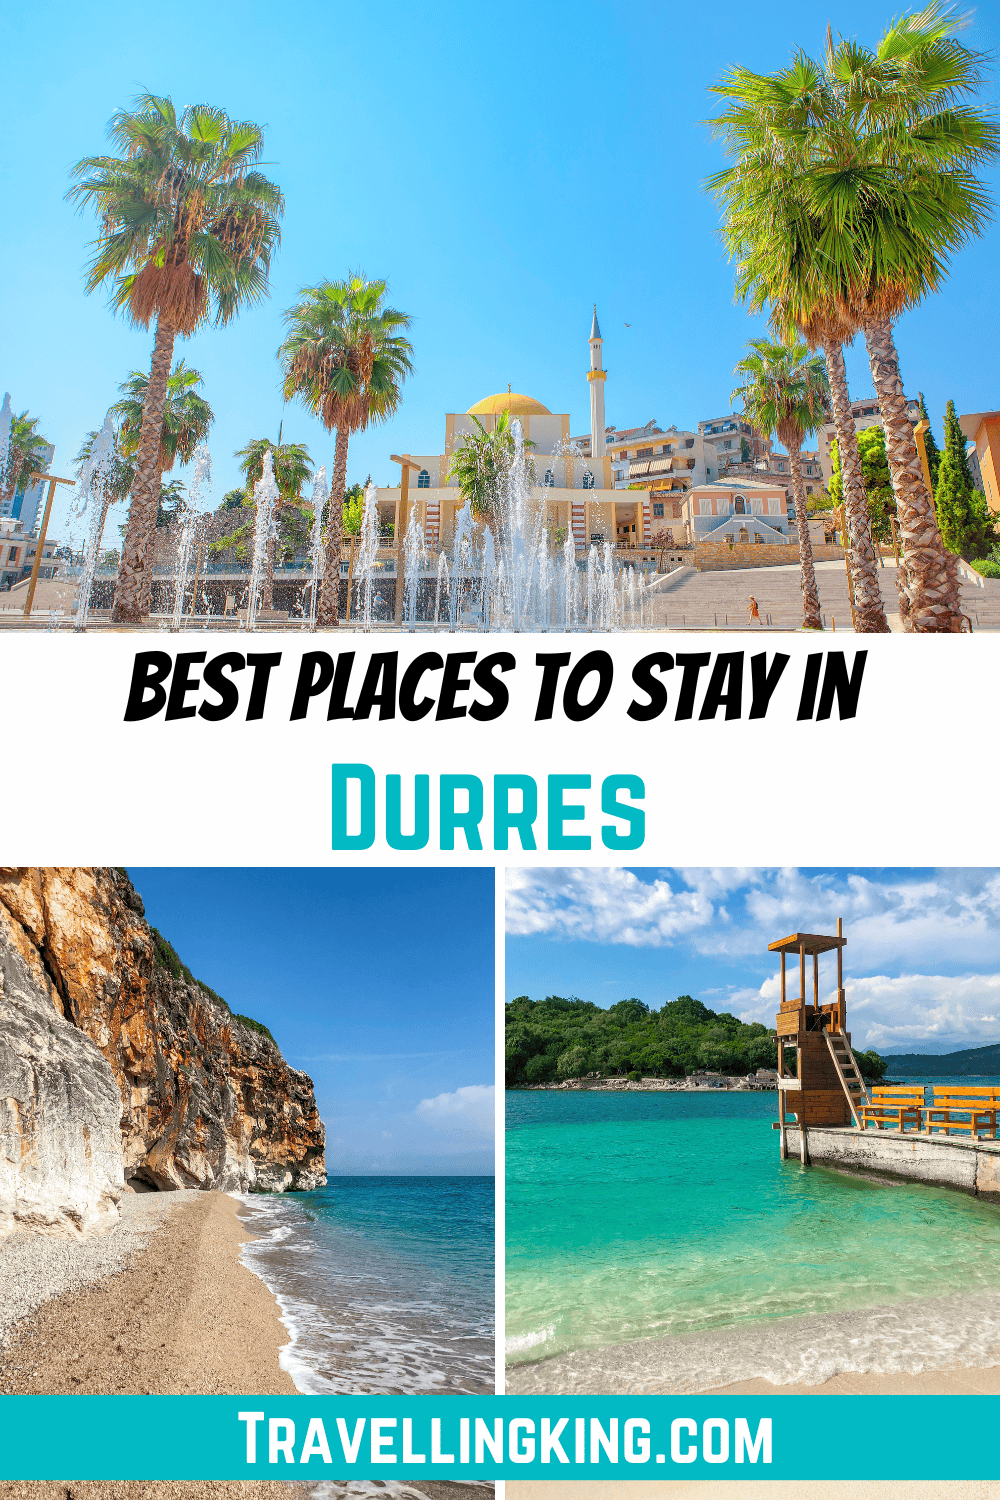 TOP 5 Areas To Stay in Durres [Where to stay in Durres]